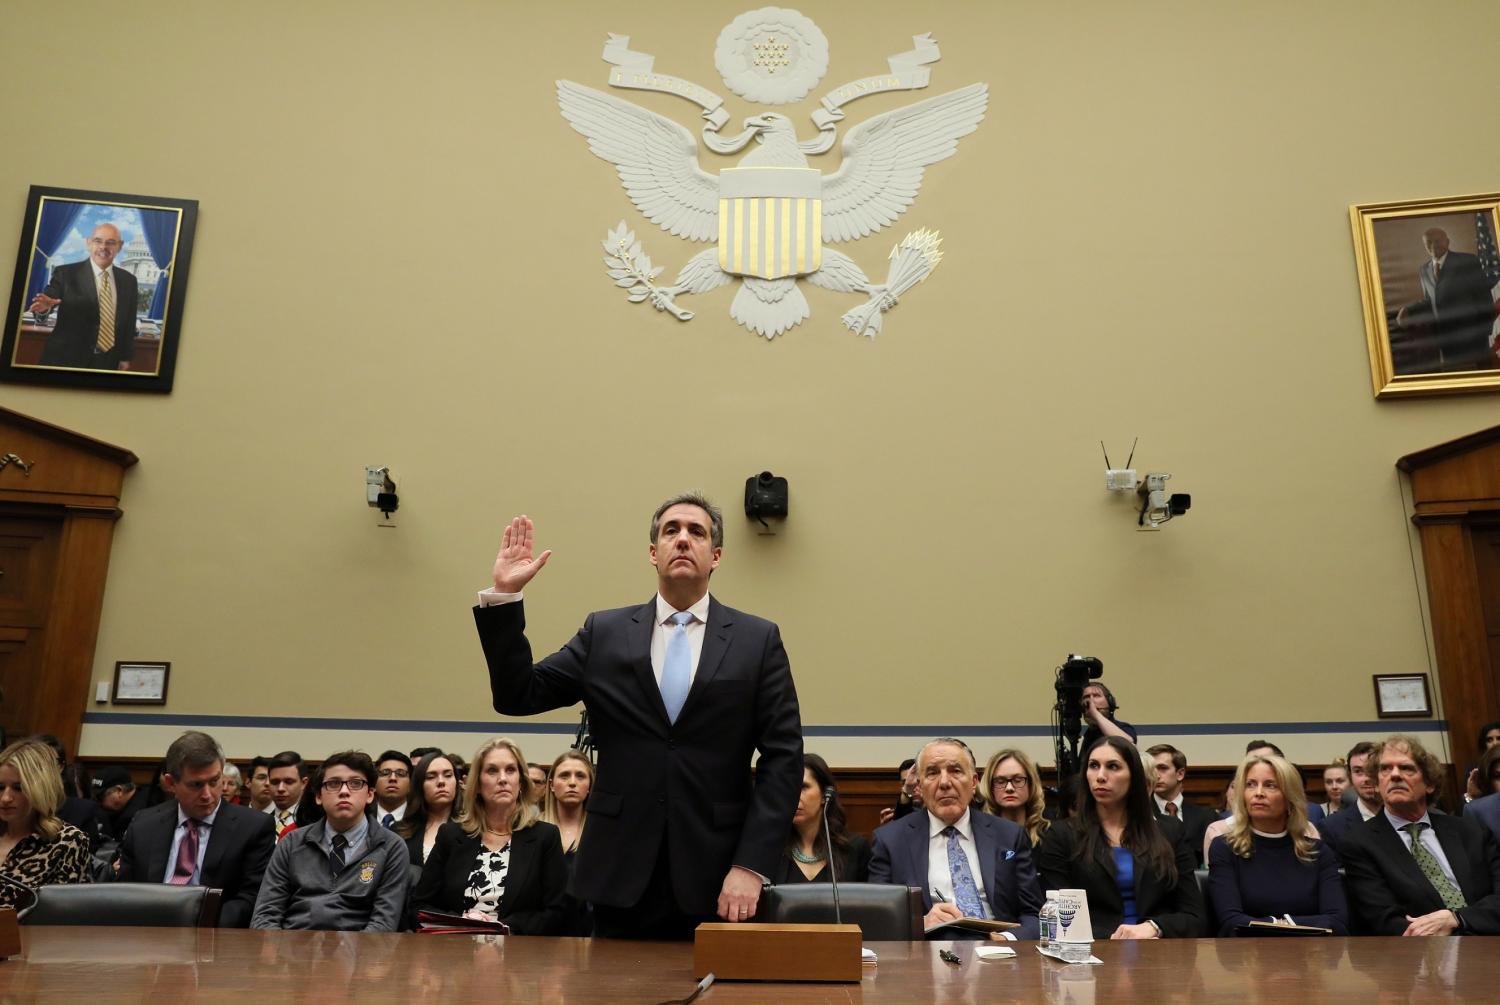 Michael Cohen, the former personal attorney of U.S. President Donald Trump, is sworn in to testify before a House Committee on Oversight and Reform hearing on Capitol Hill in Washington, U.S., February 27, 2019. REUTERS/Jonathan Ernst - RC1942B18160